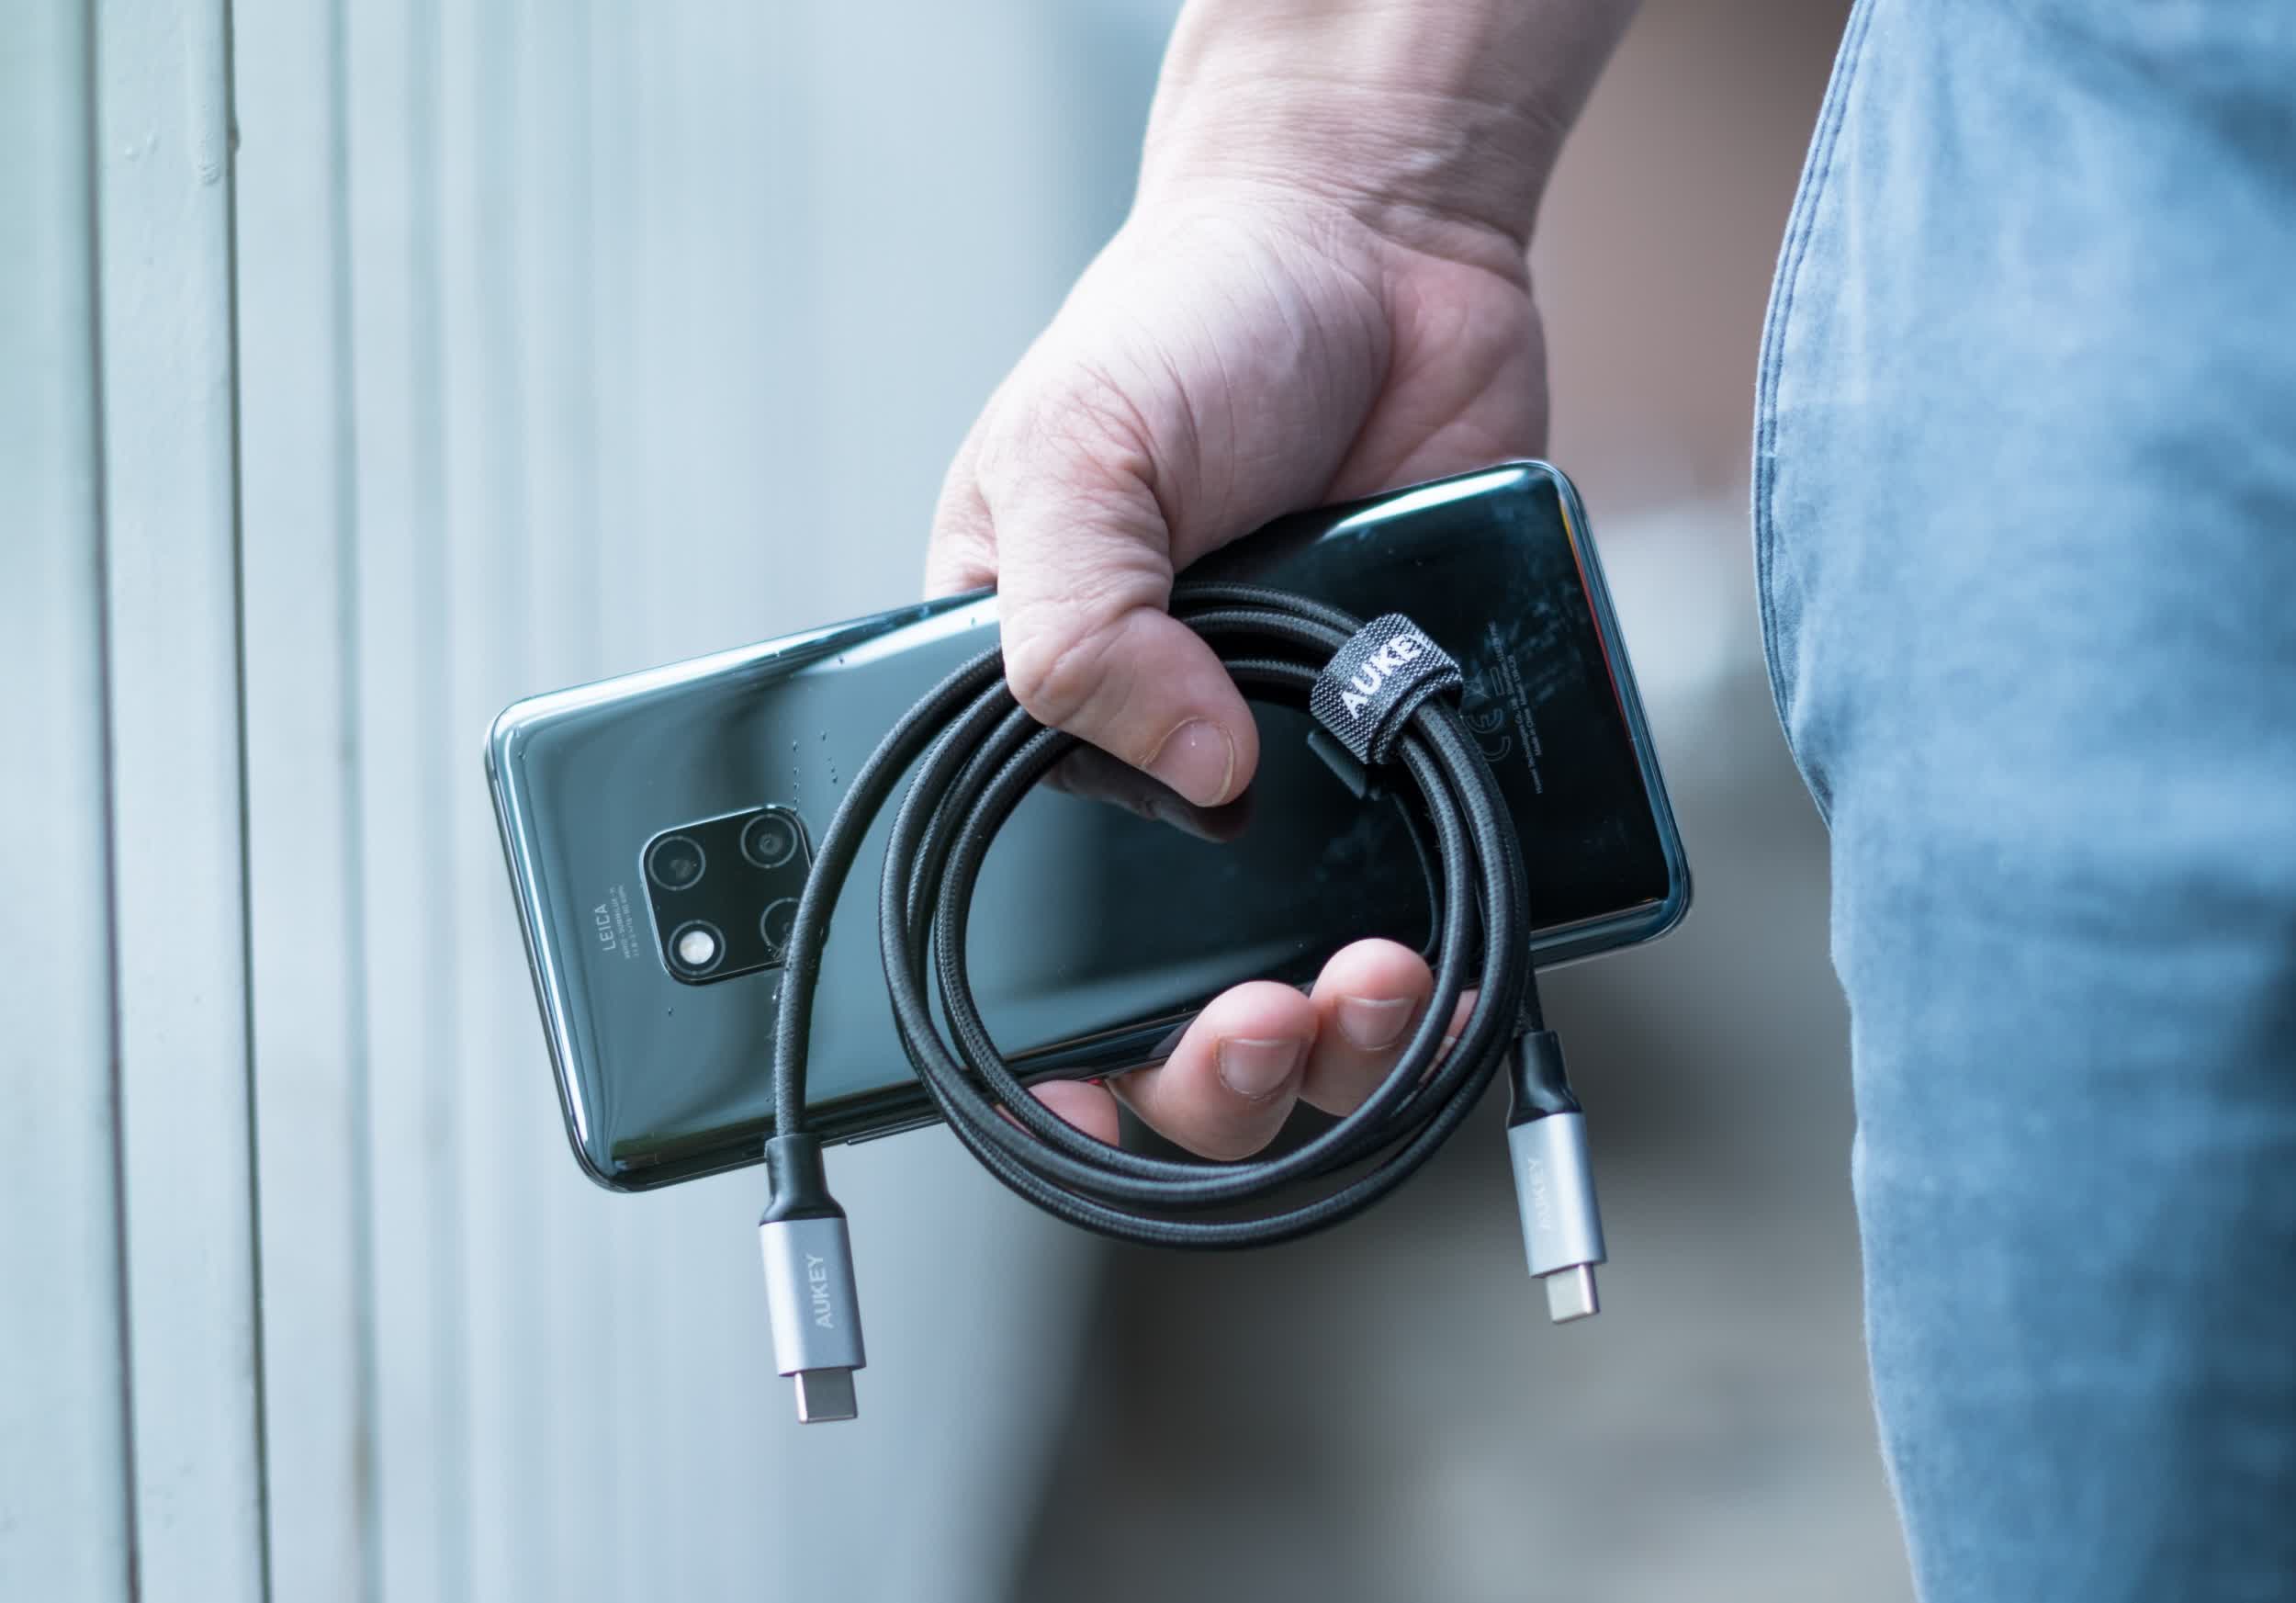 US lawmakers want to follow the EU in mandating a universal charging standard